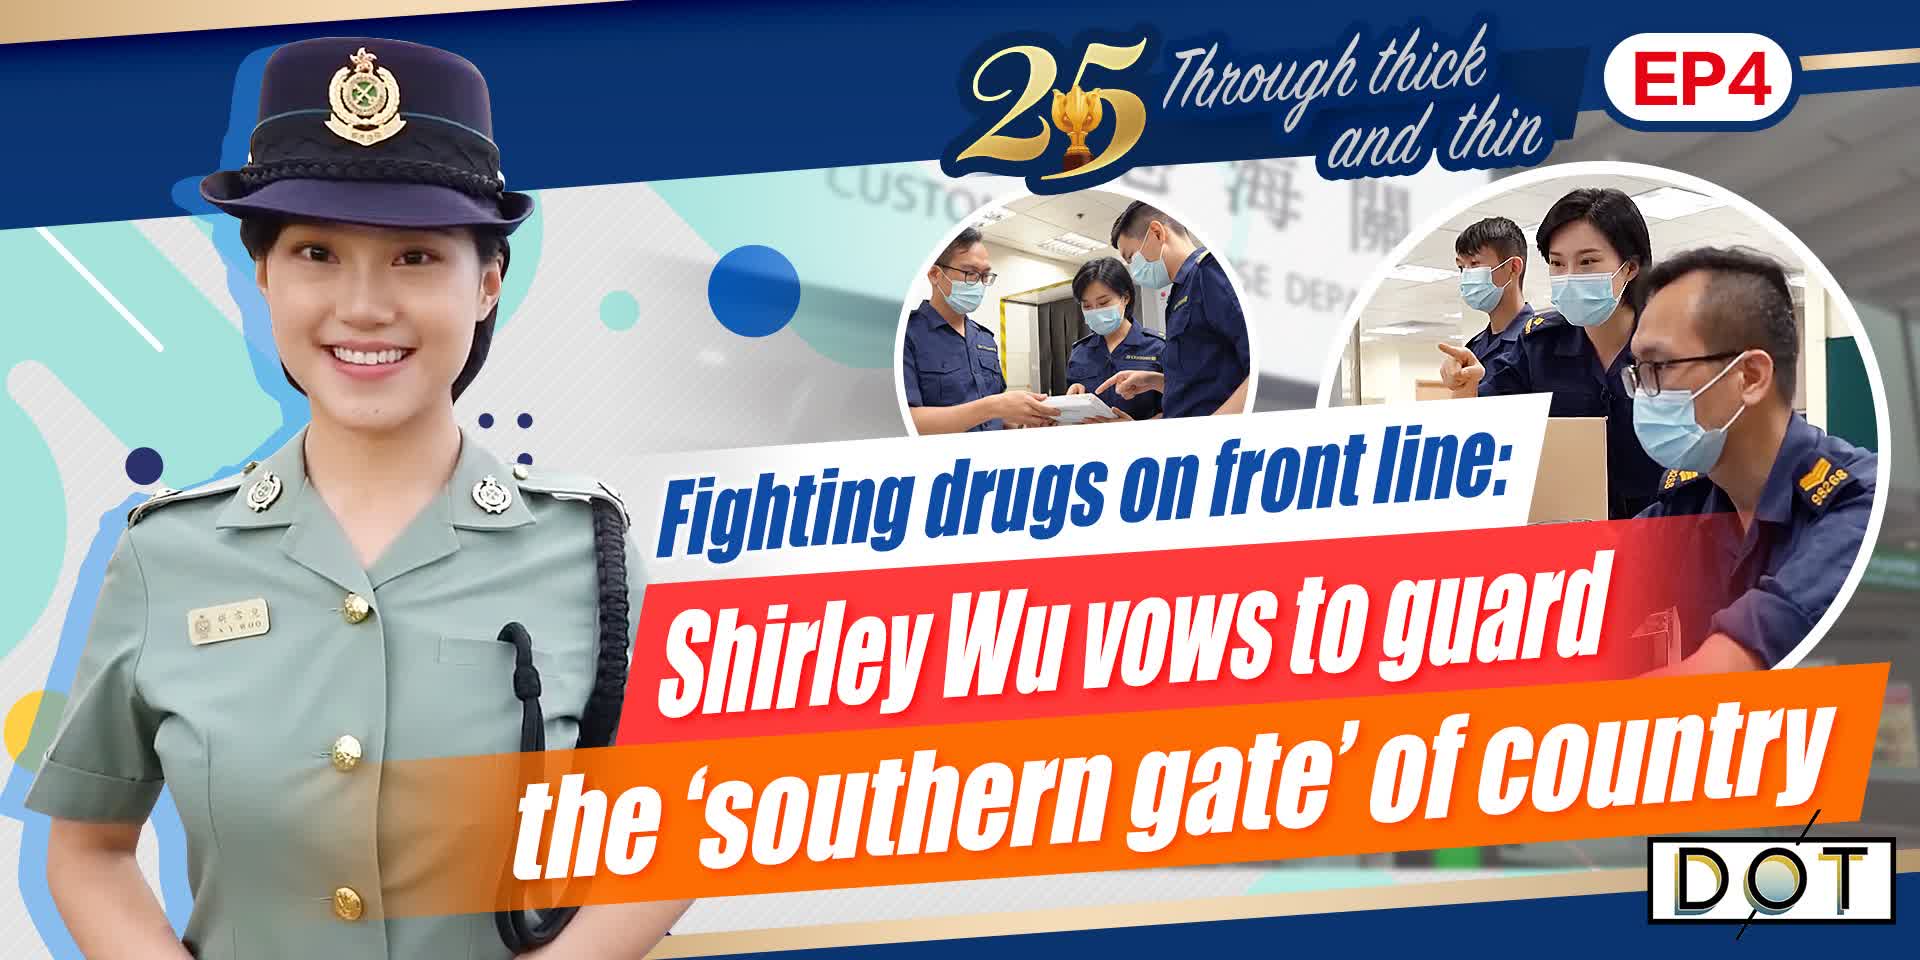 25 · Through thick and thin | Fighting drugs on front line: Shirley Wu vows to guard the 'southern gate' of country